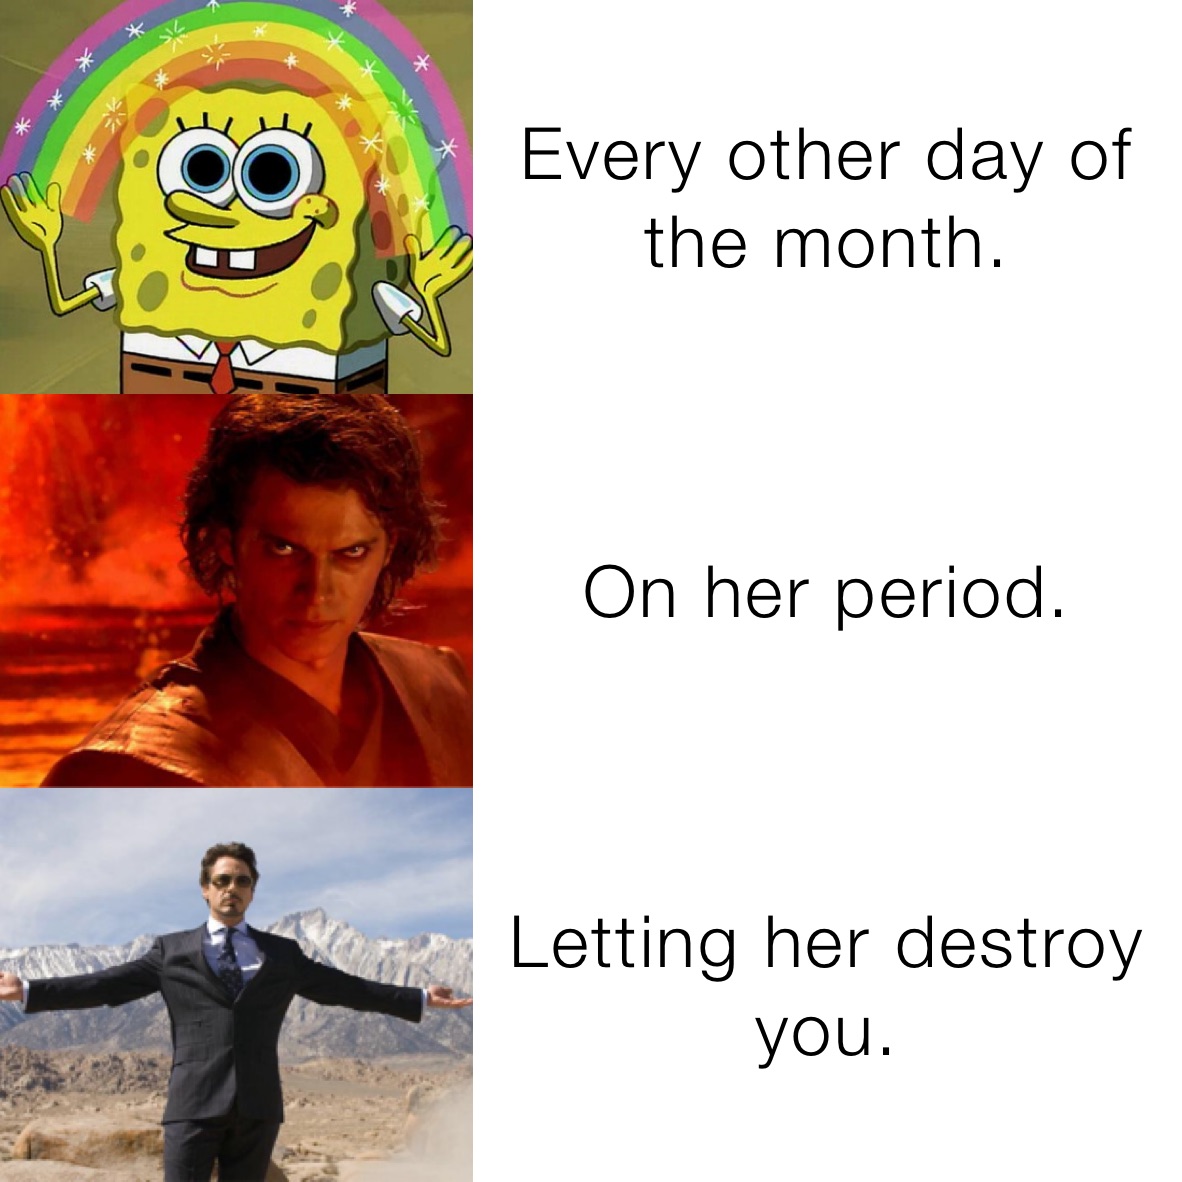 Every other day of the month. On her period. Letting her destroy you.